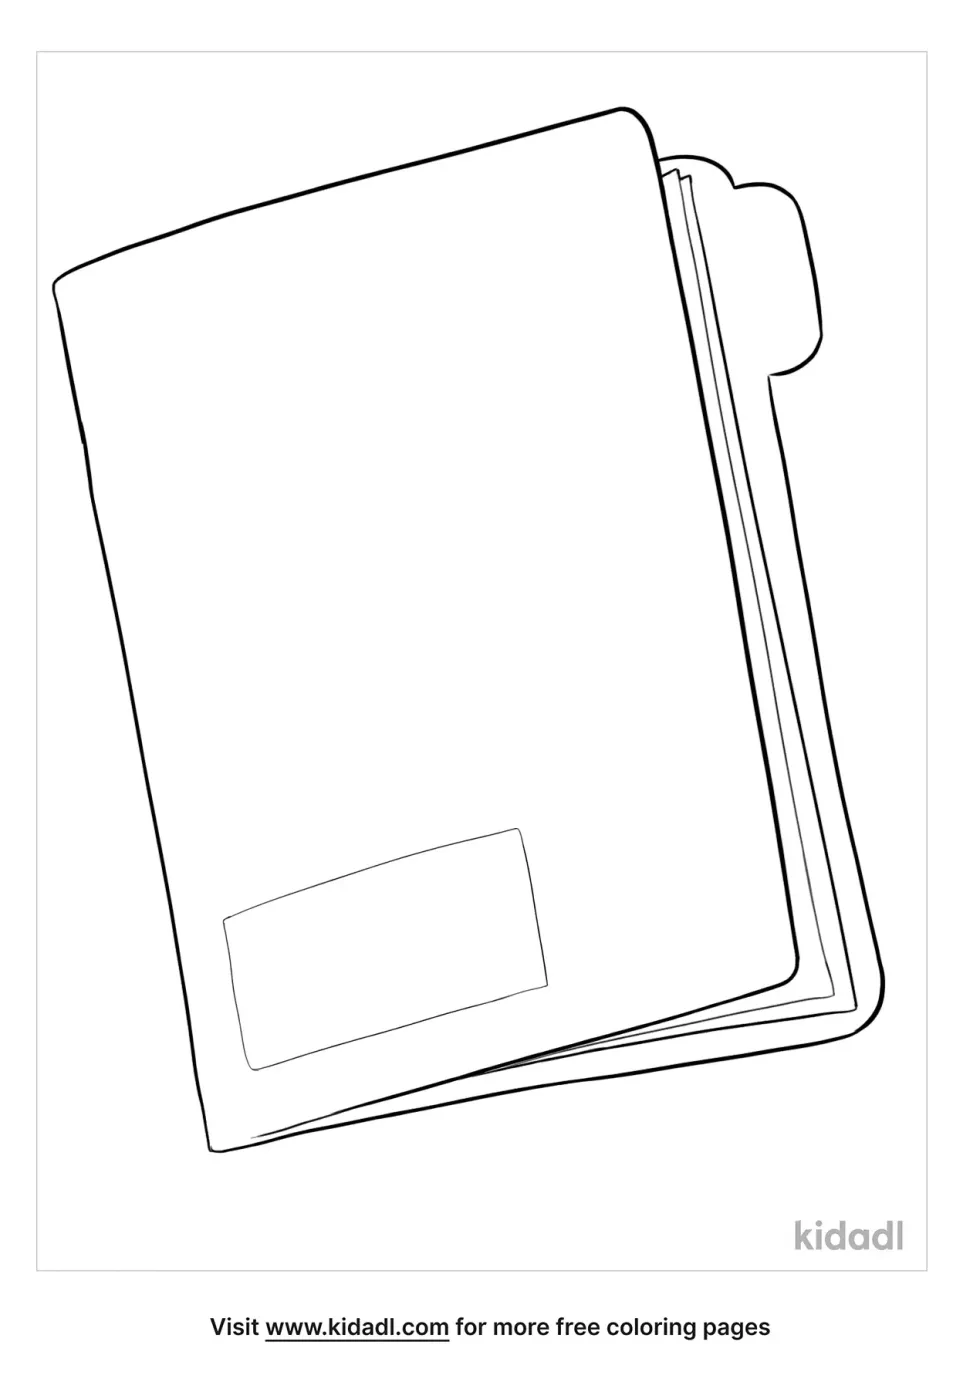 Folder Coloring Page